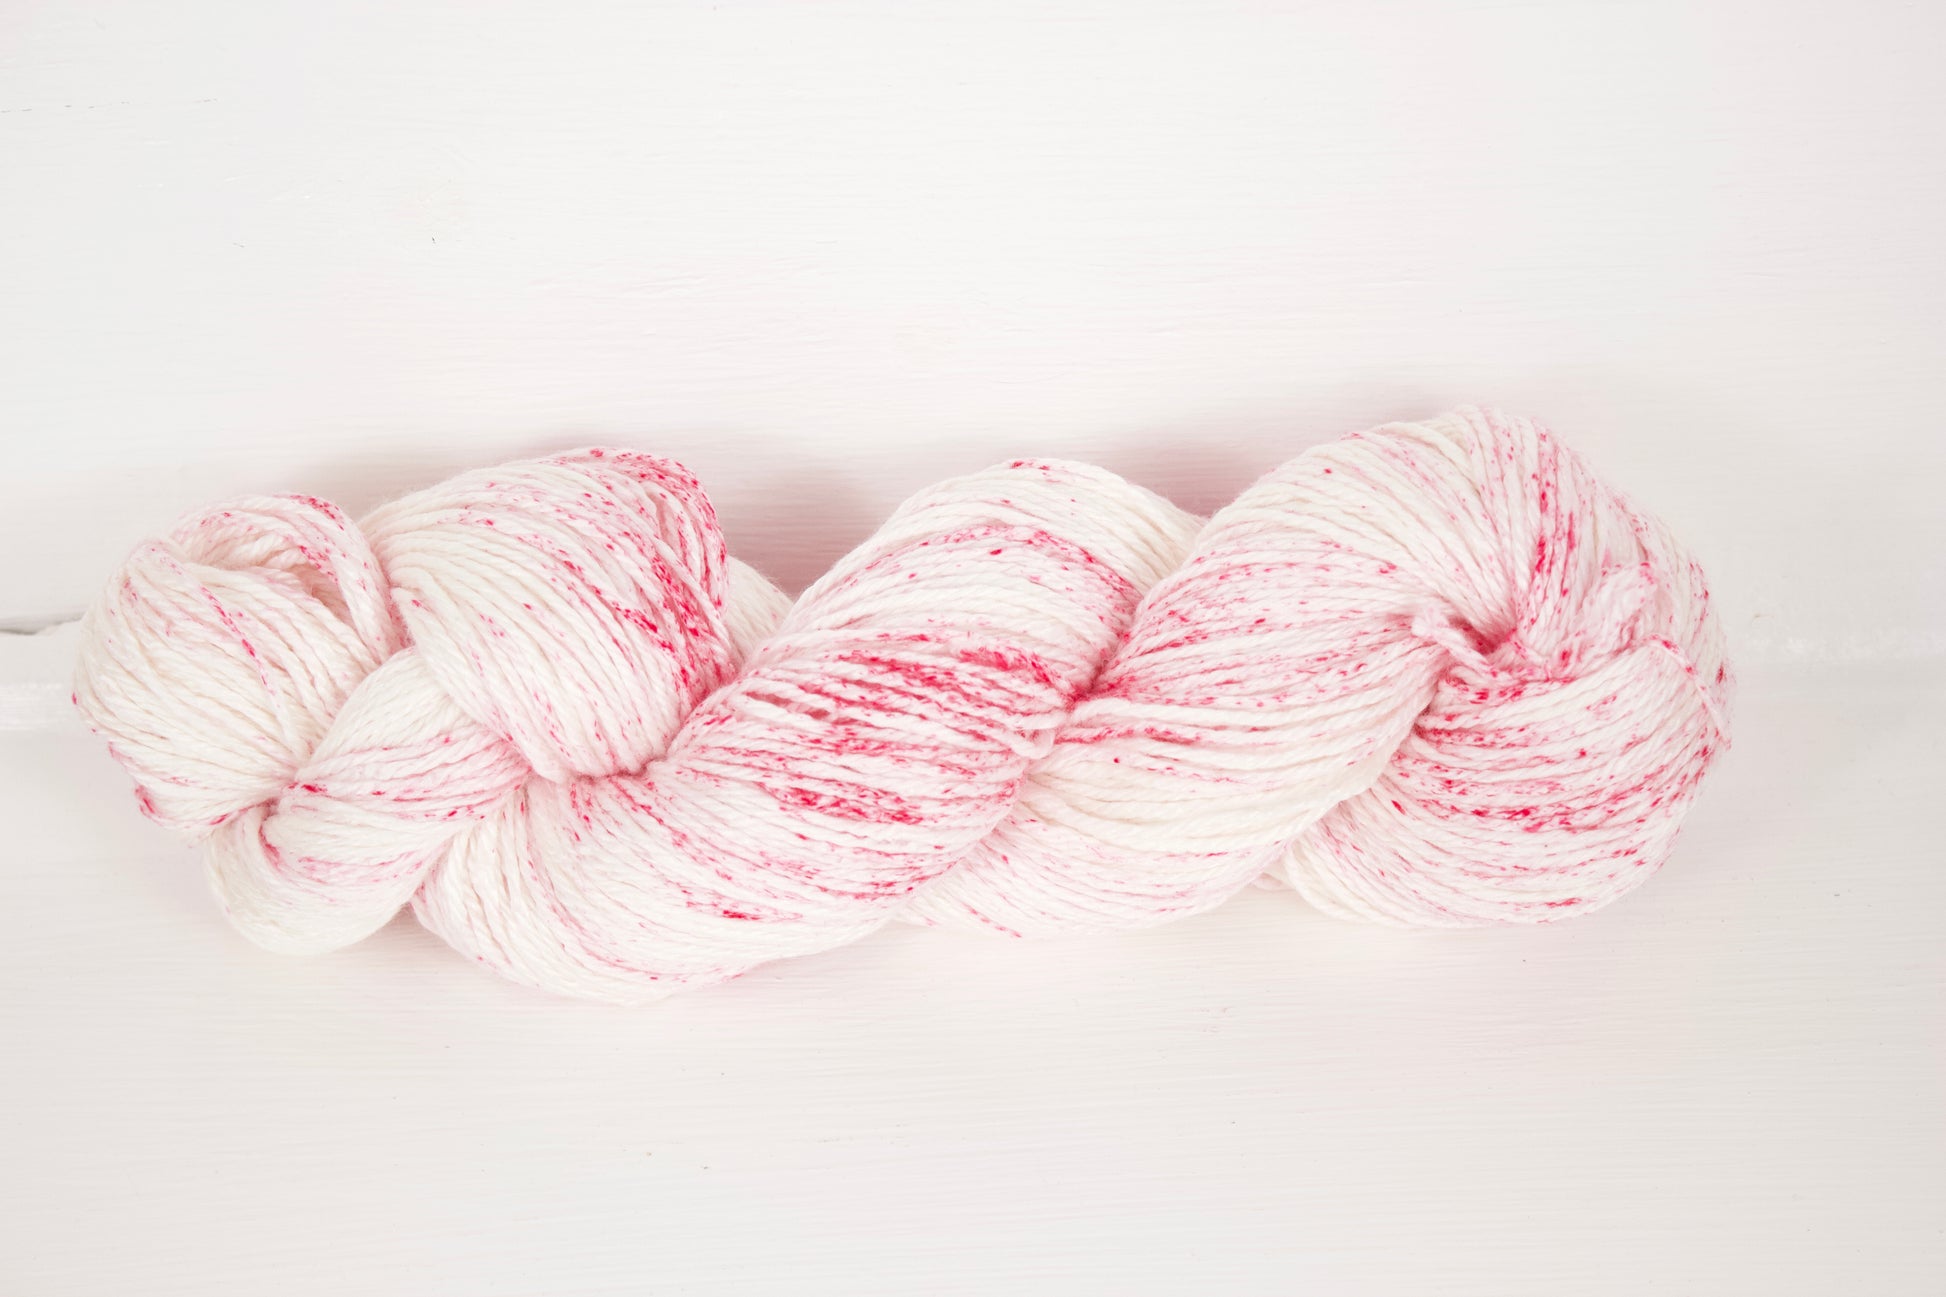 Creamy white base with hot pink speckles, this photo shows the whole skein